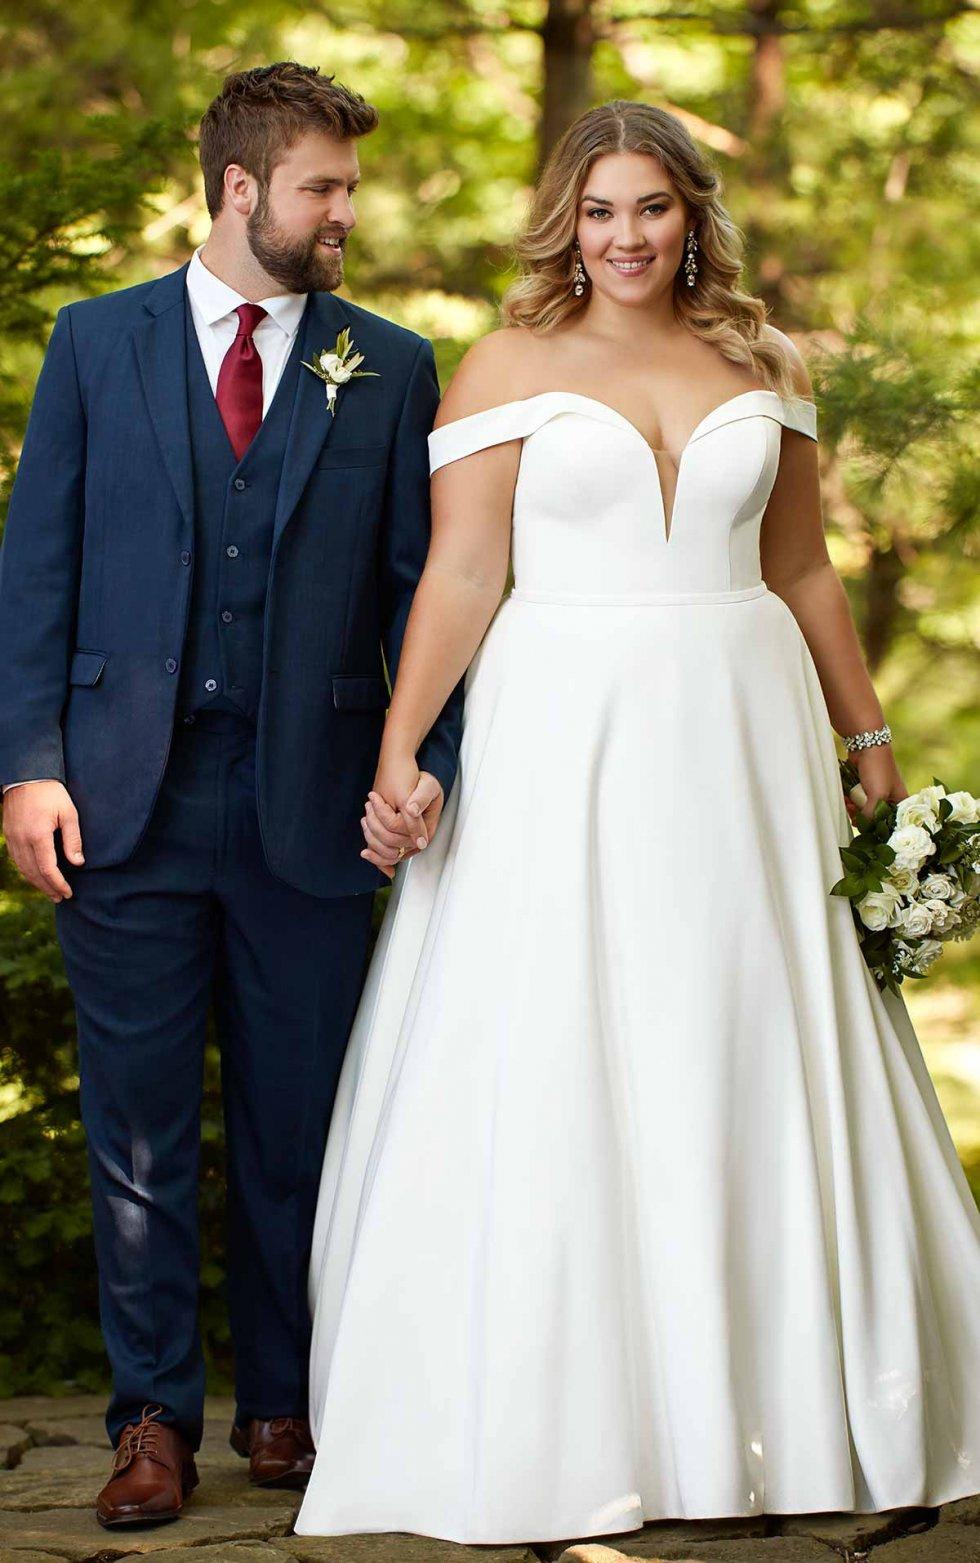 Most Flattering Wedding Gown Designs For Plus-size Brides